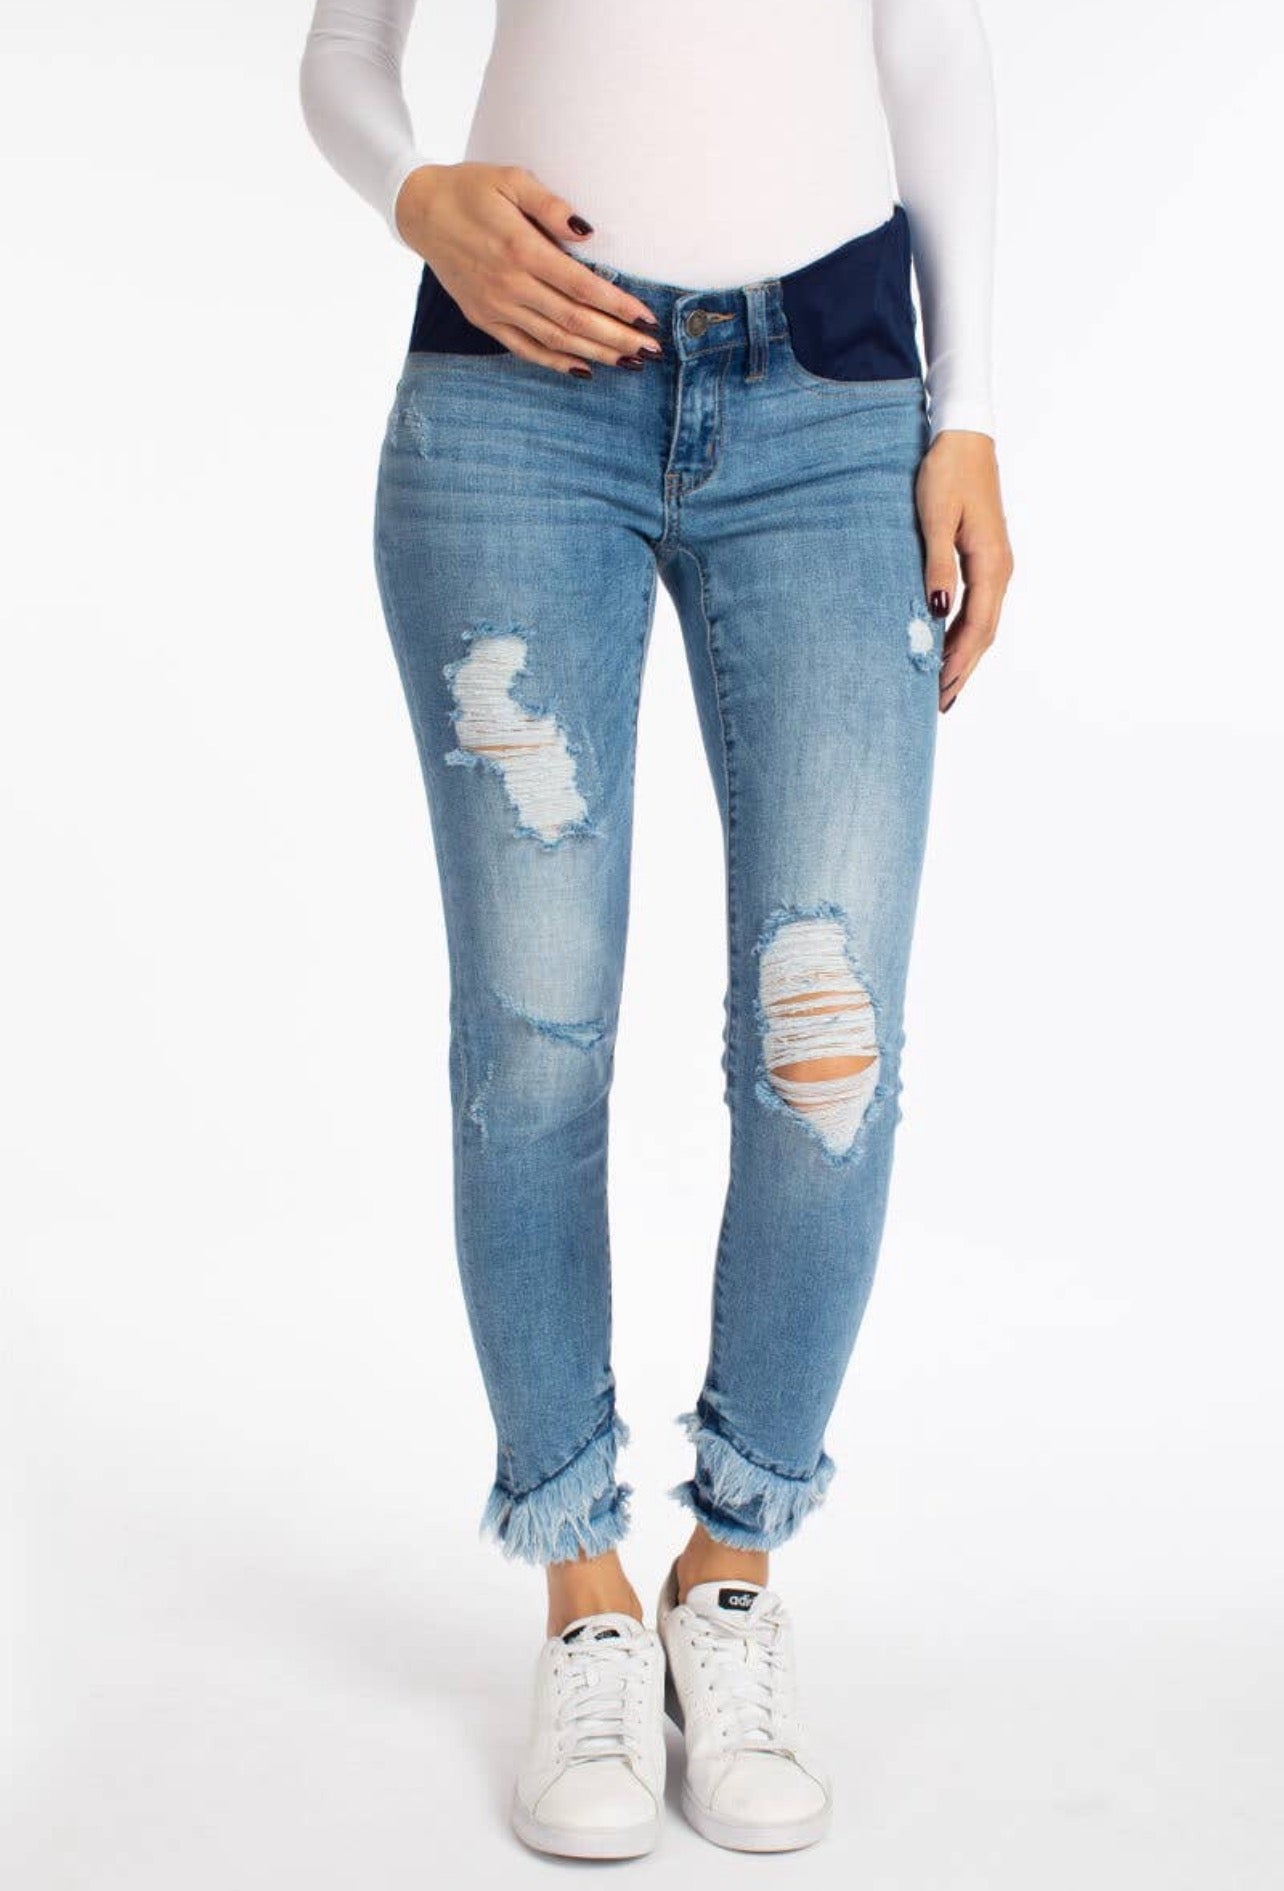 Distressed light washed maternity jeans